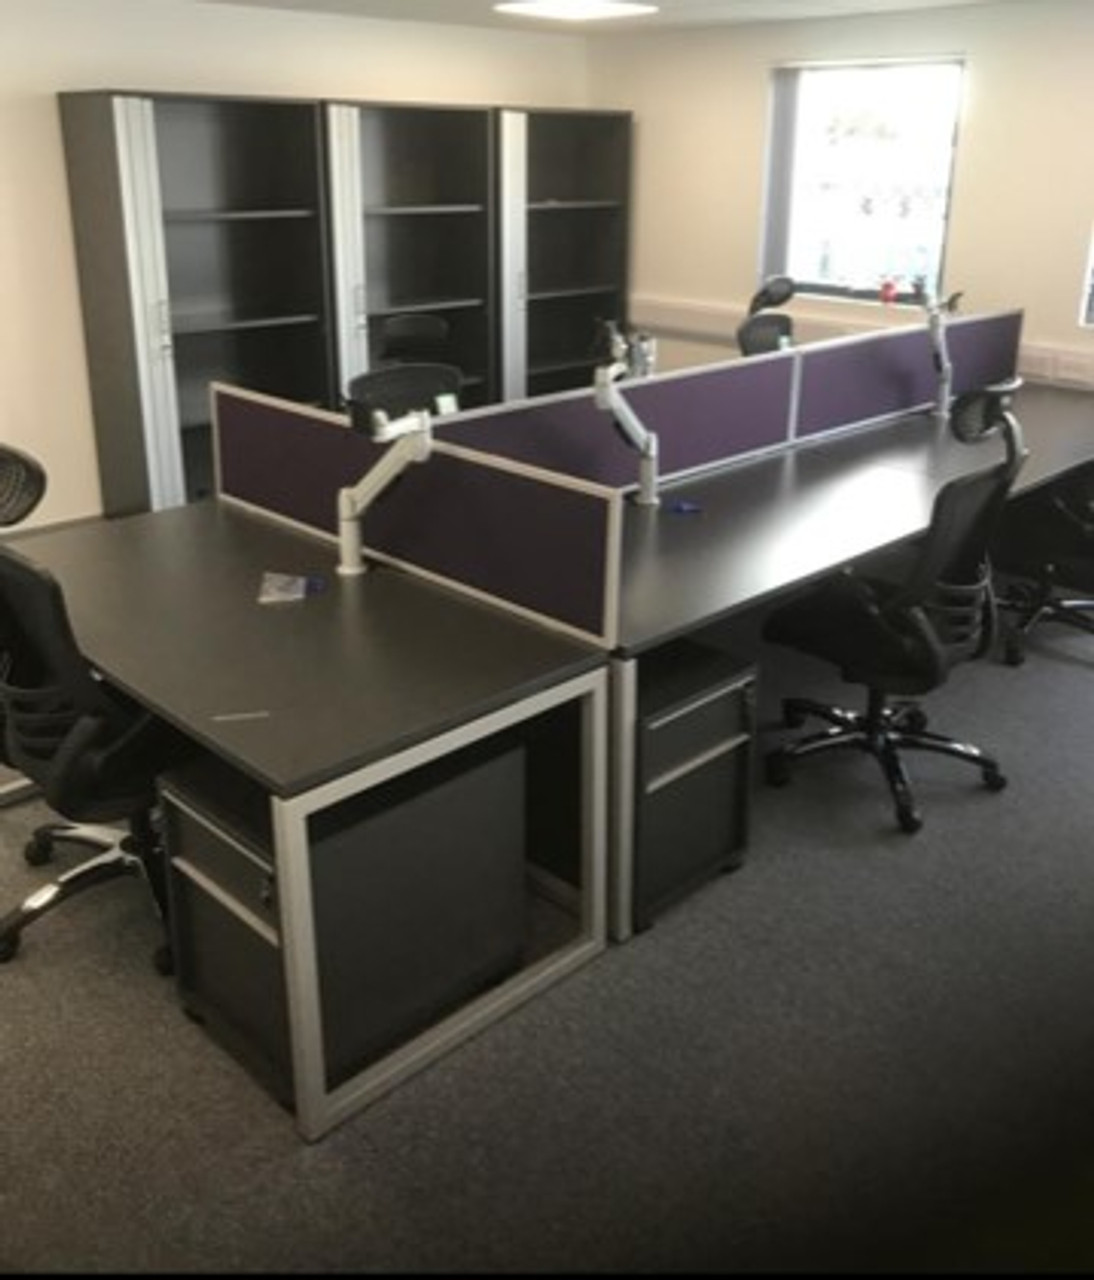 Office Furniture Essex_Office Fit Out_UPR Services_Office Furniture Stanford Le Hope